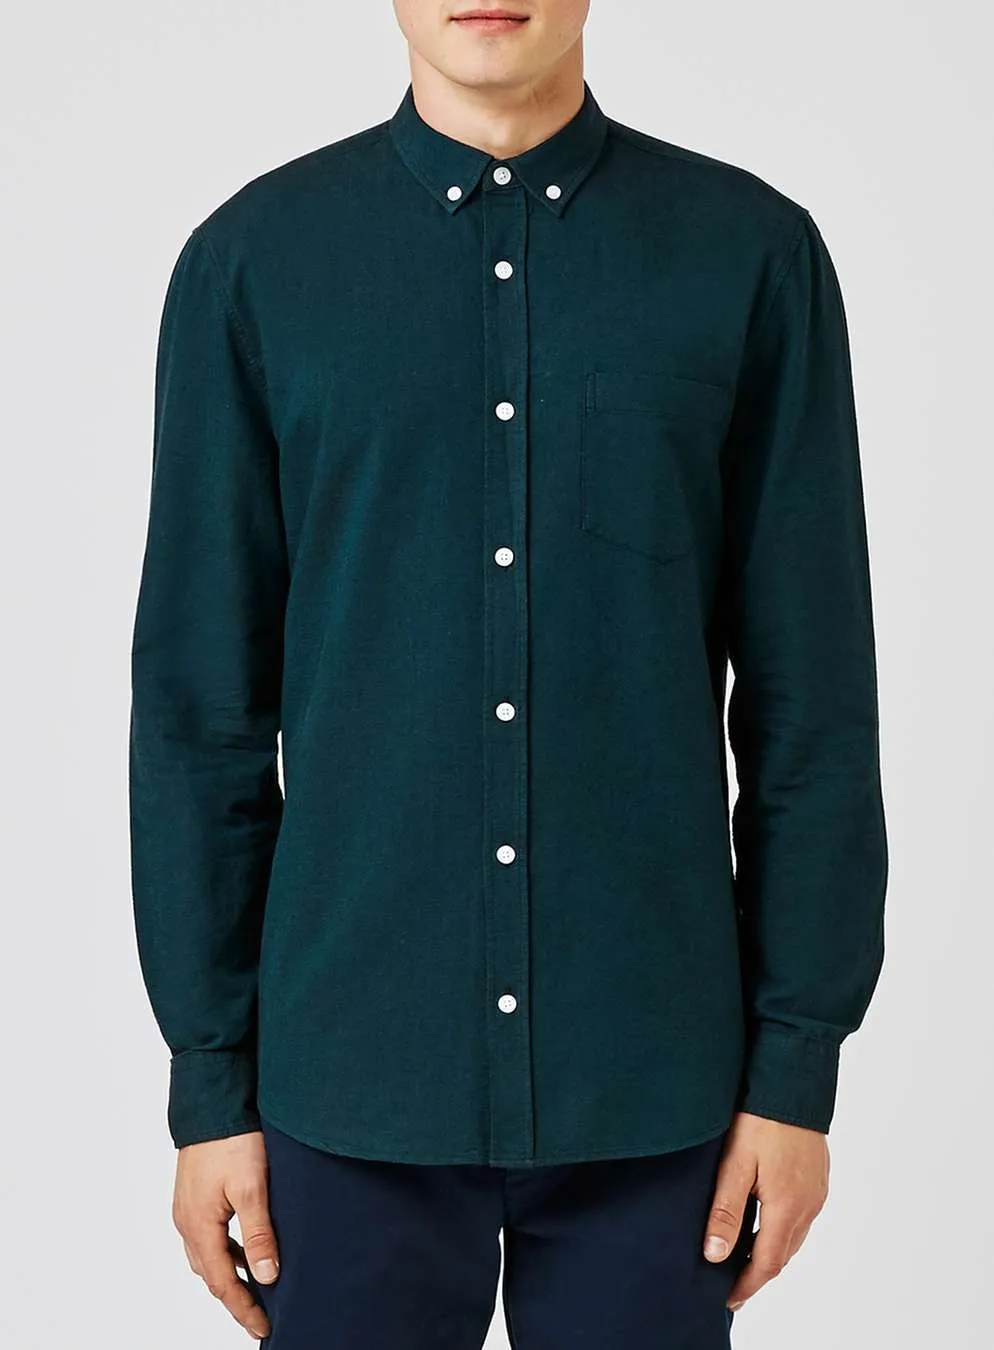 Factory Wholesale Mens Green Woven Oxford Shirts - Buy Woven Oxford ...